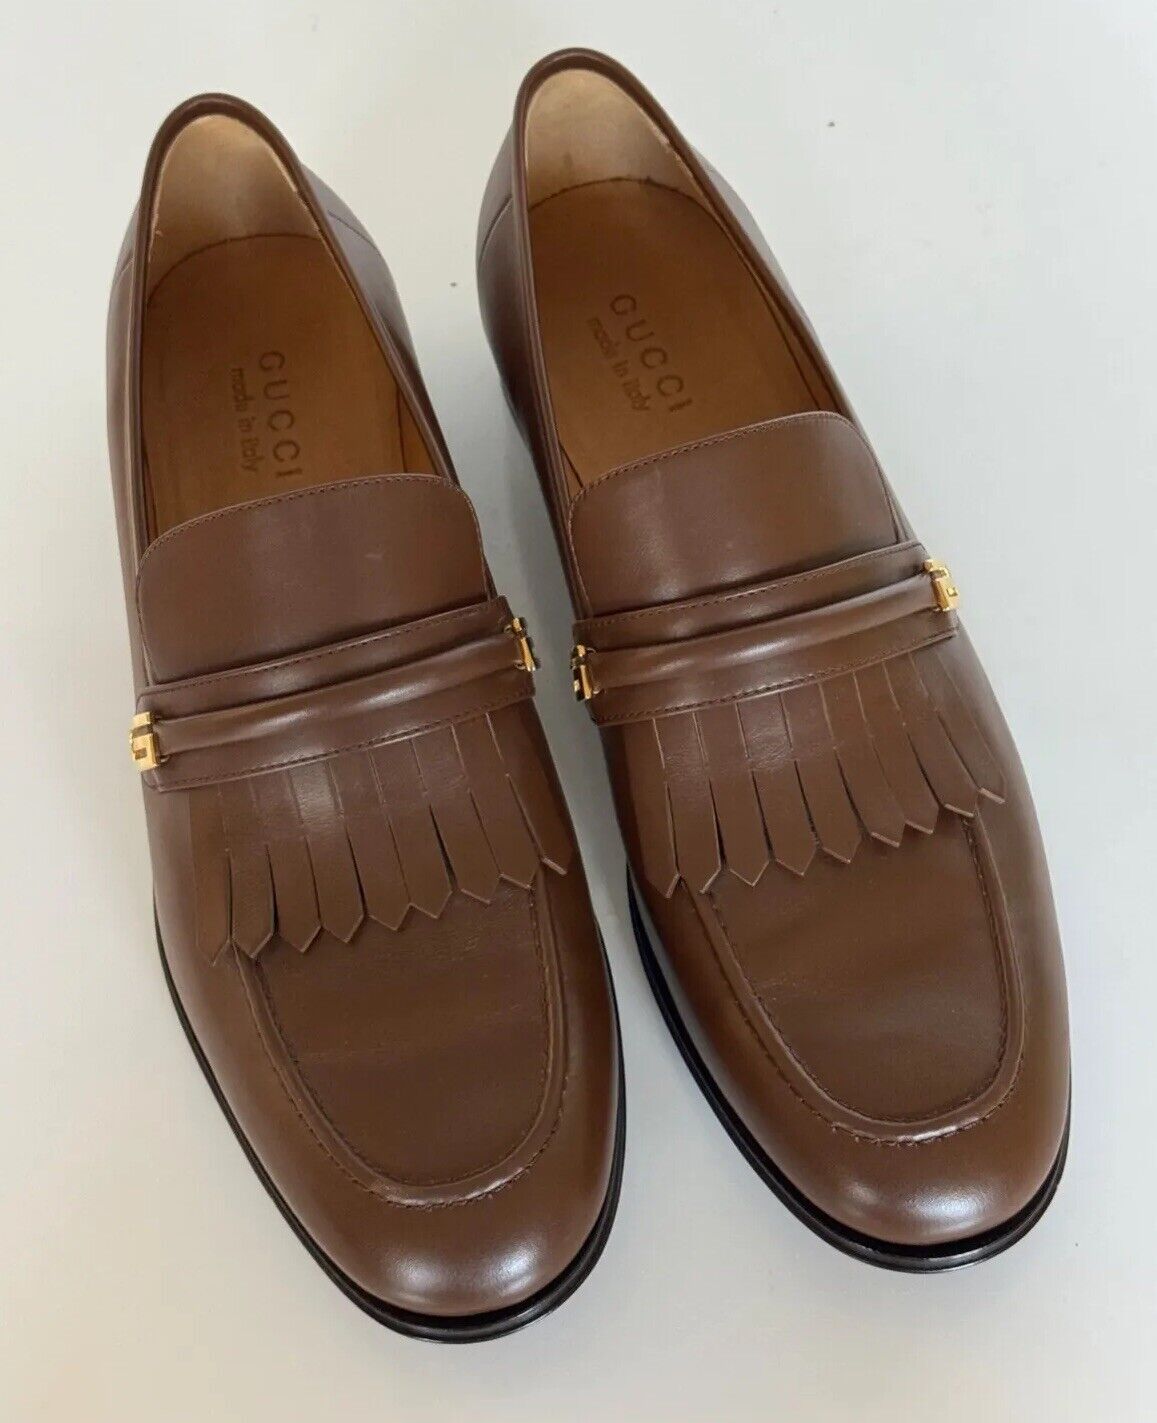 NIB Gucci Men’s Moccasin Leather Dress Shoes Brown 11.5 US (10.5 Gucci) 714680